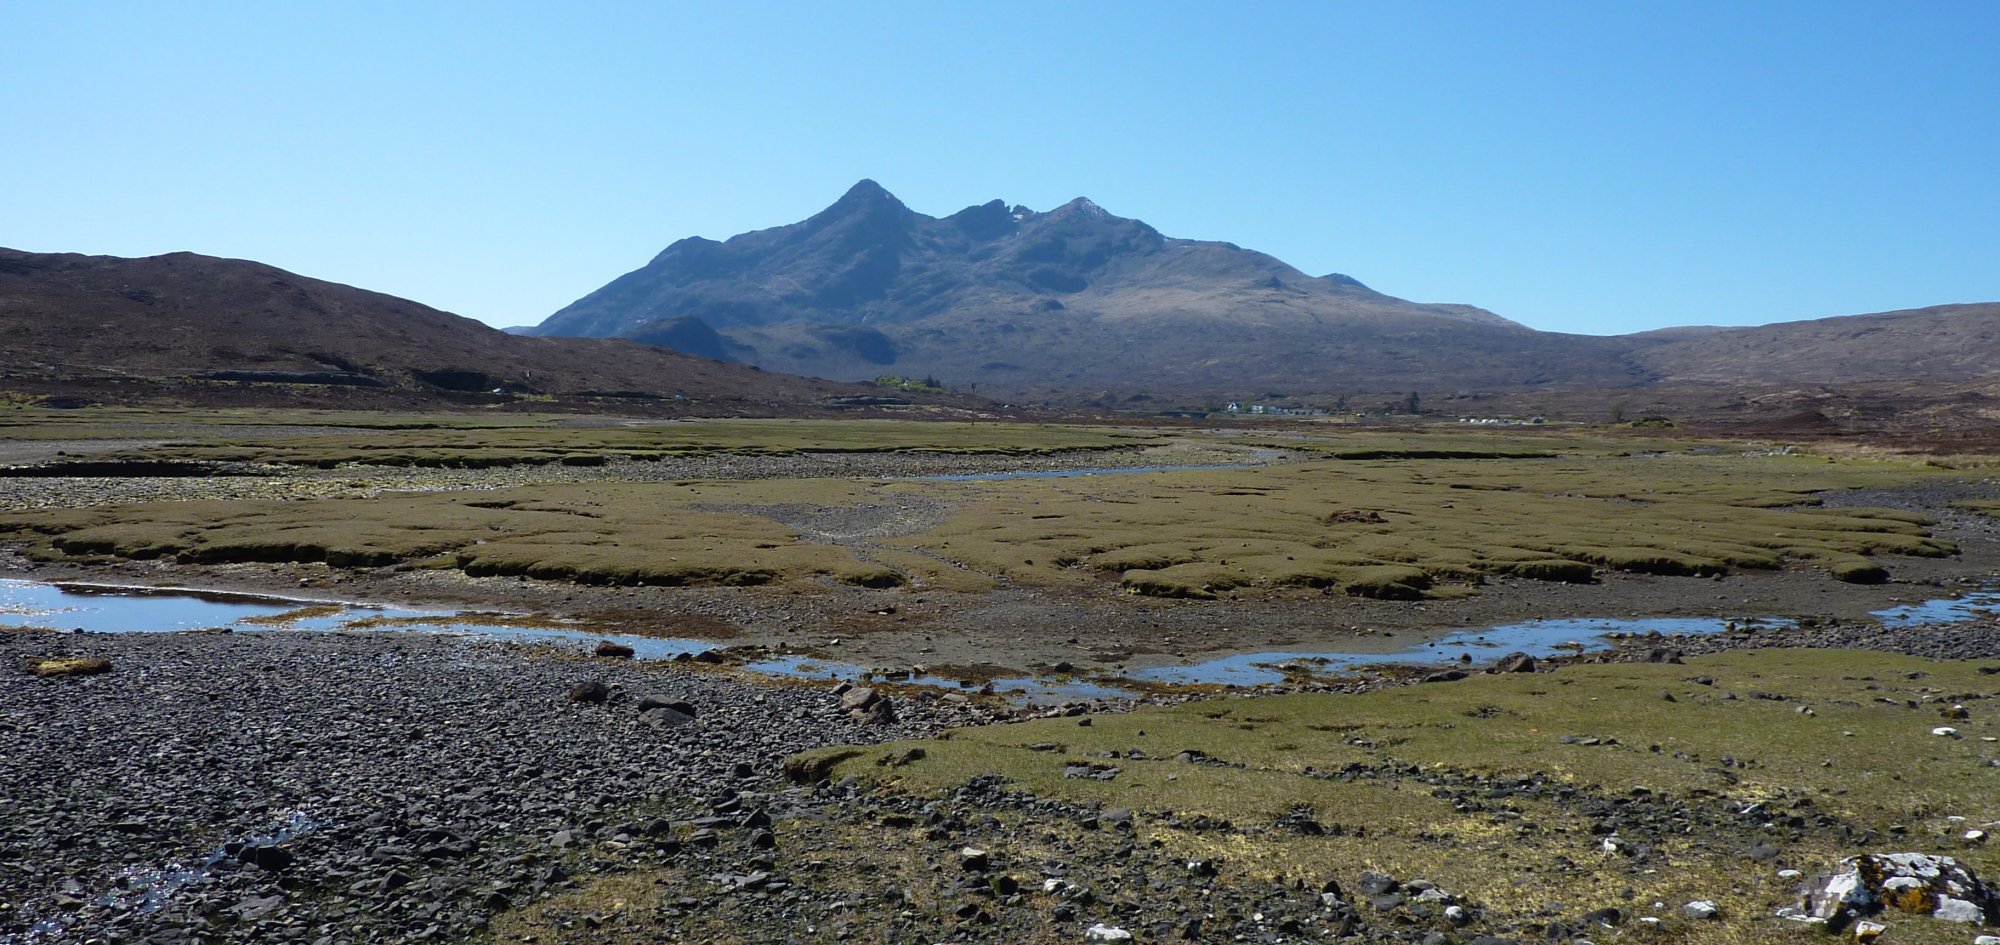 Crossing the salt marshes at the head of the Loch, with Cuillins in the background